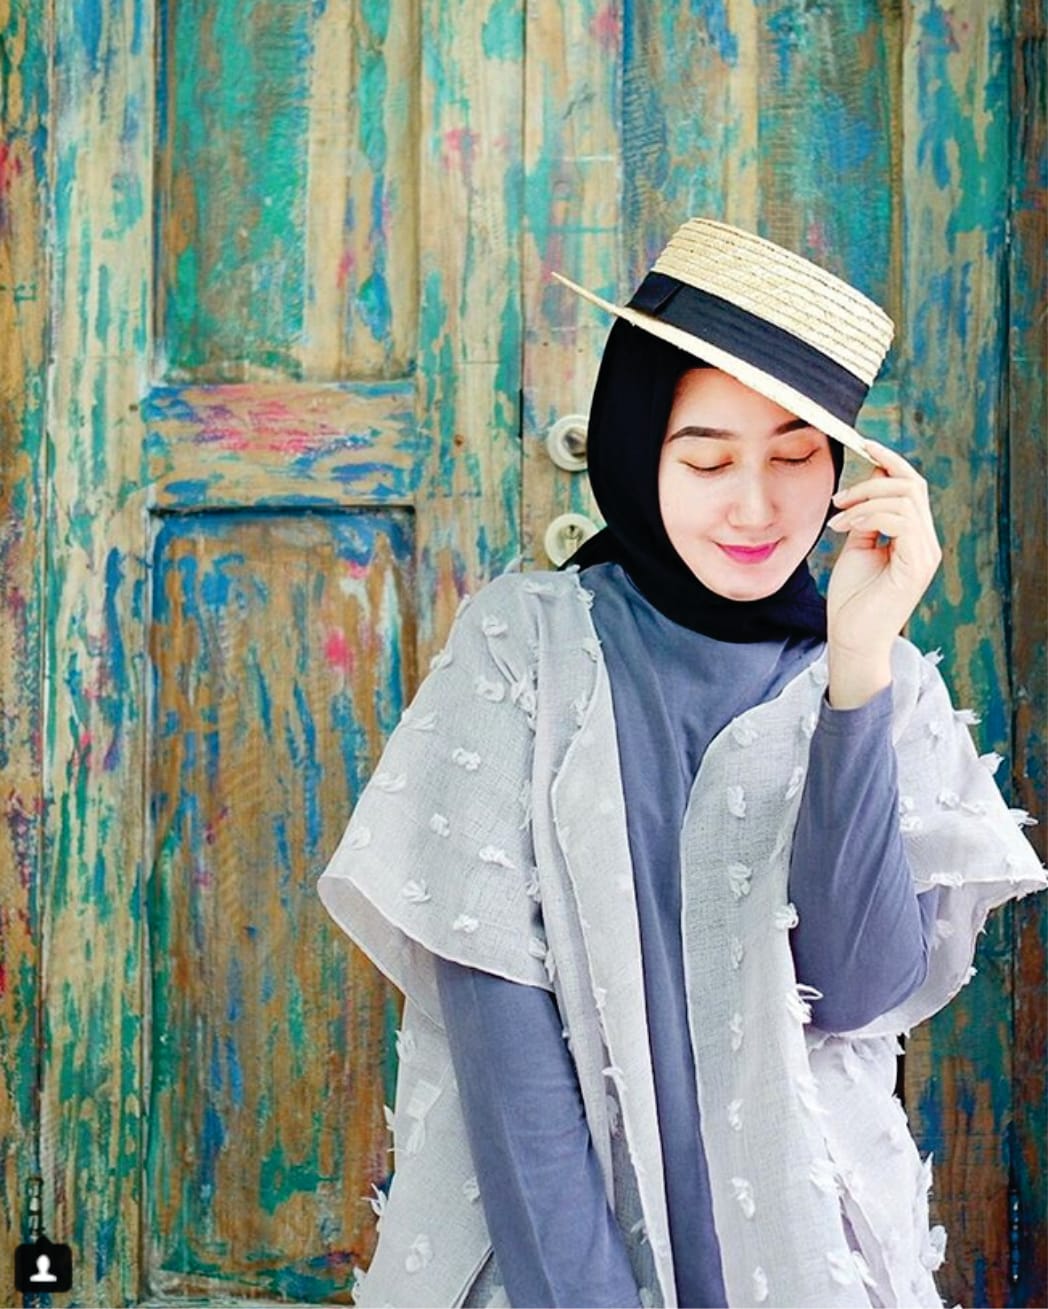 The Islamic Dressing Style is Both Religiously Coded and Fashion Bold